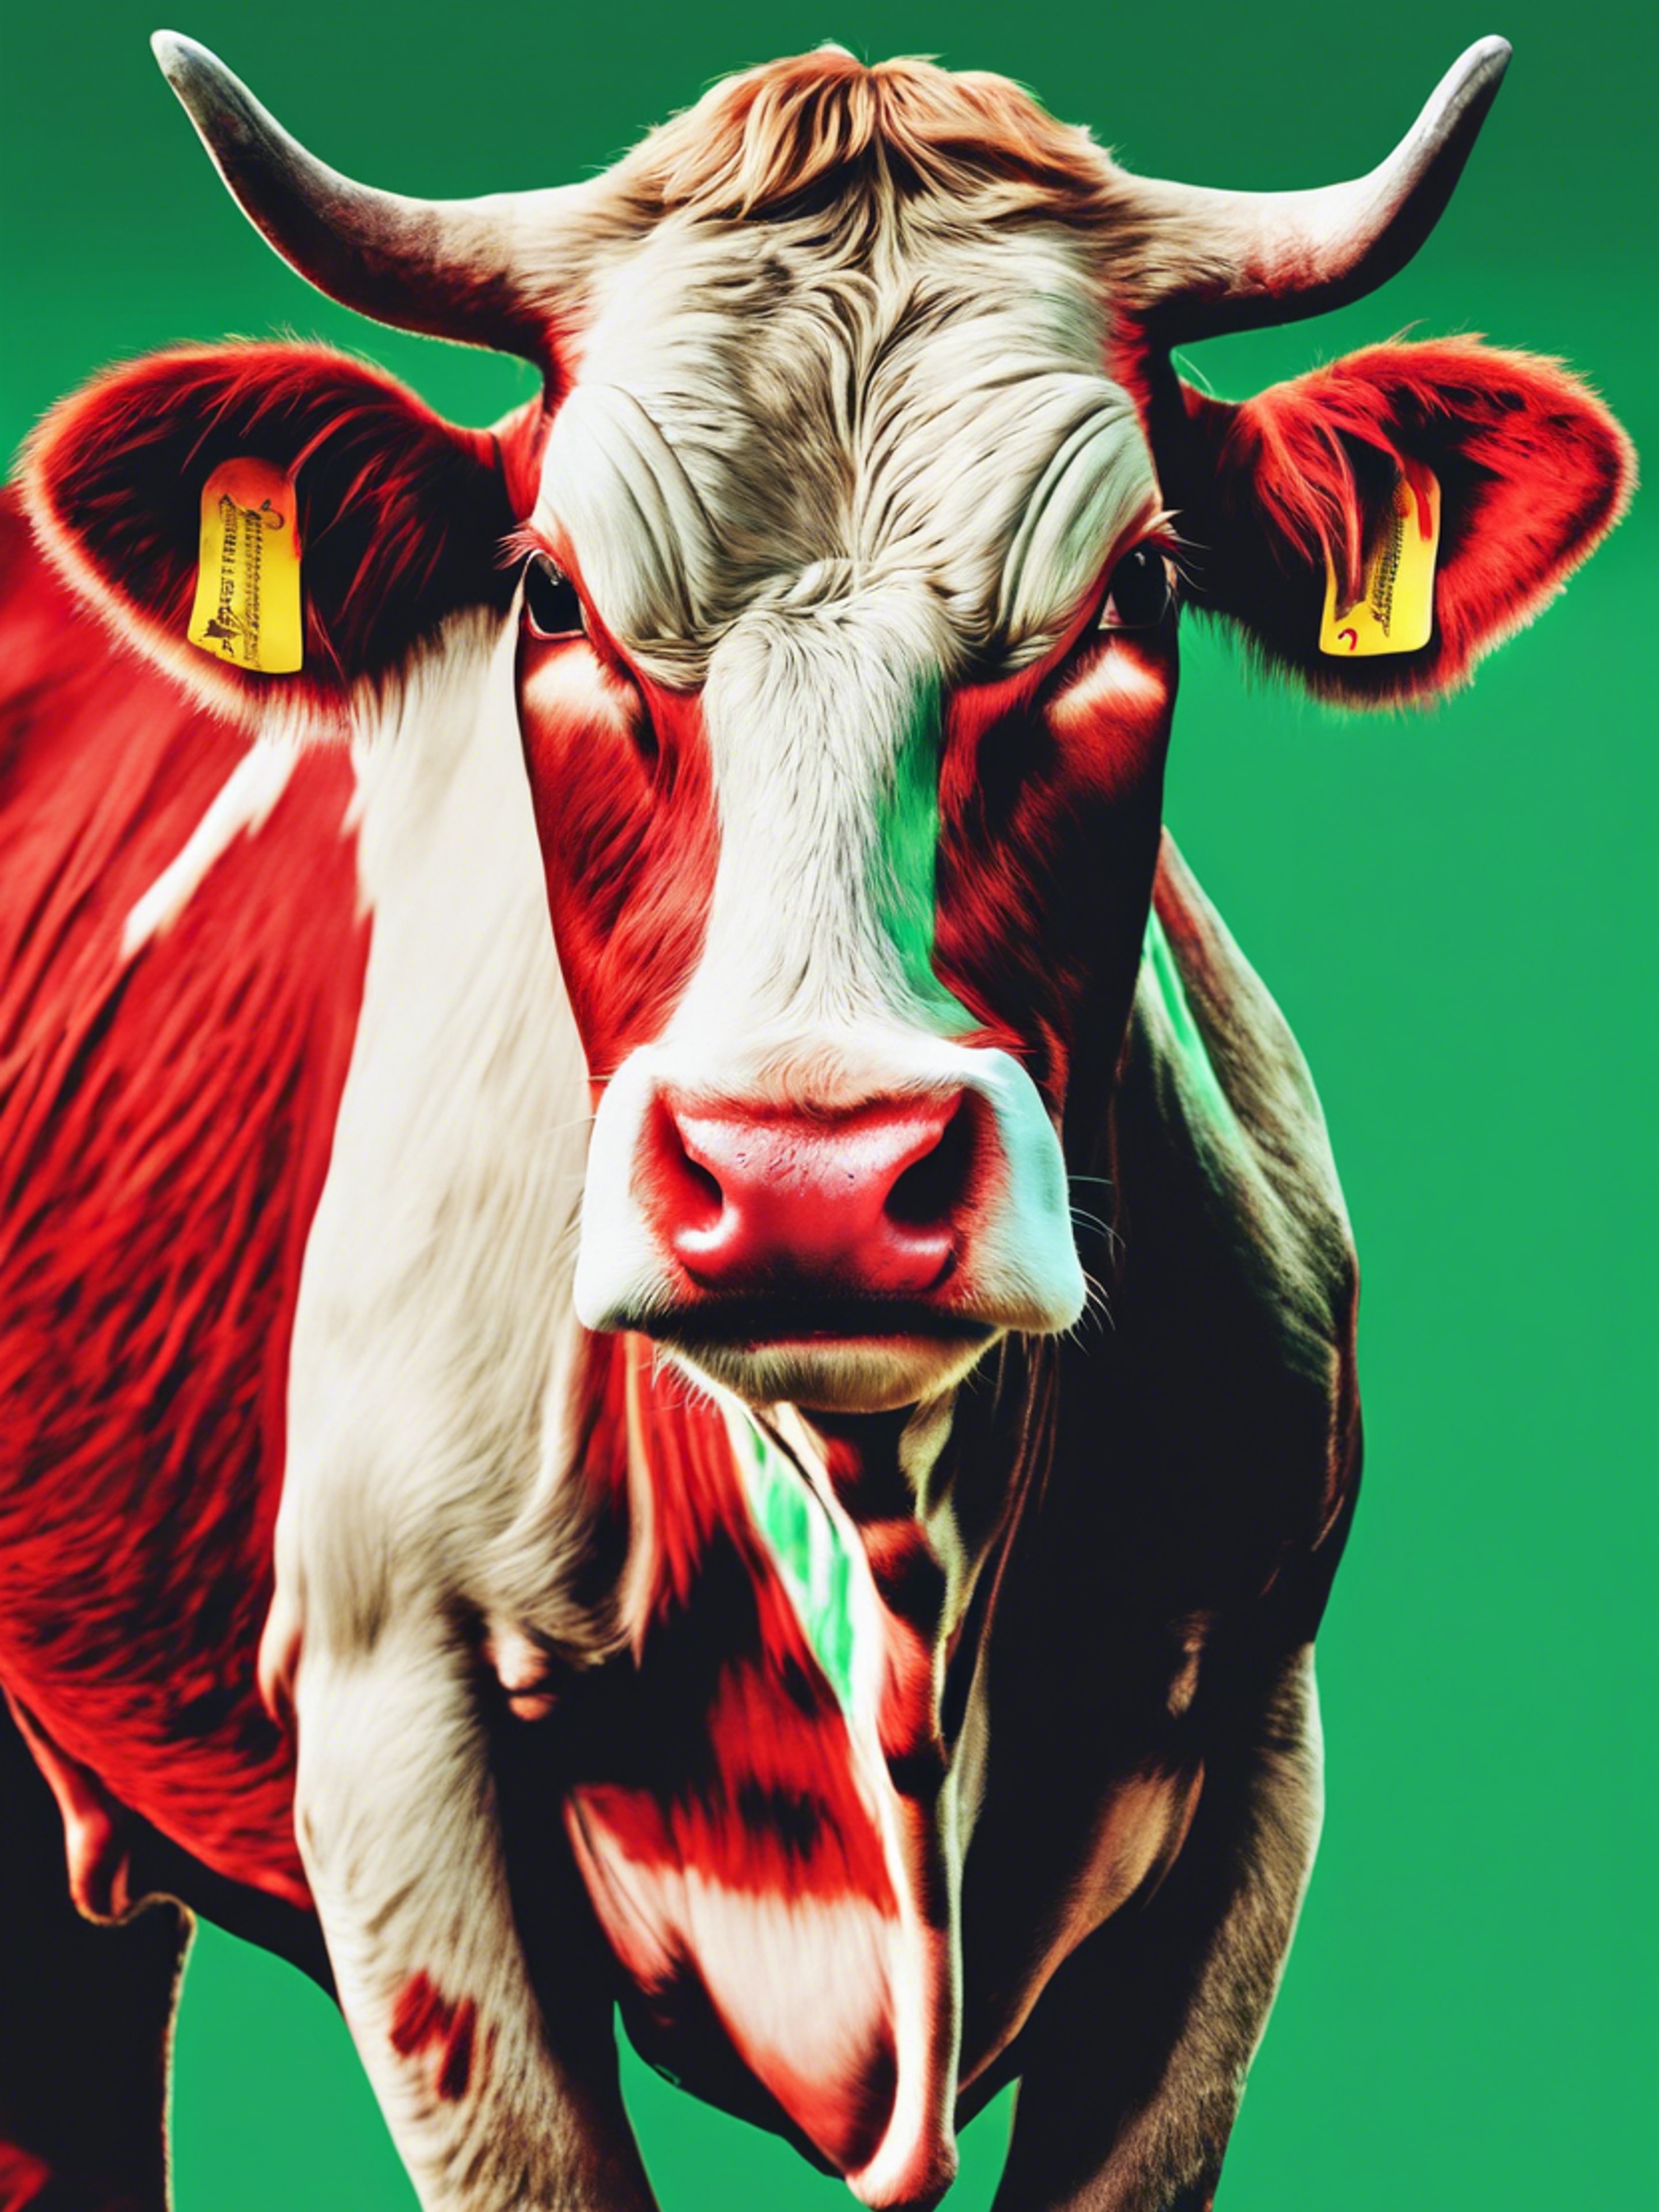 Pop-art style cow print in a palette of red and green. کاغذ دیواری[5b65906f2b9649418c8c]